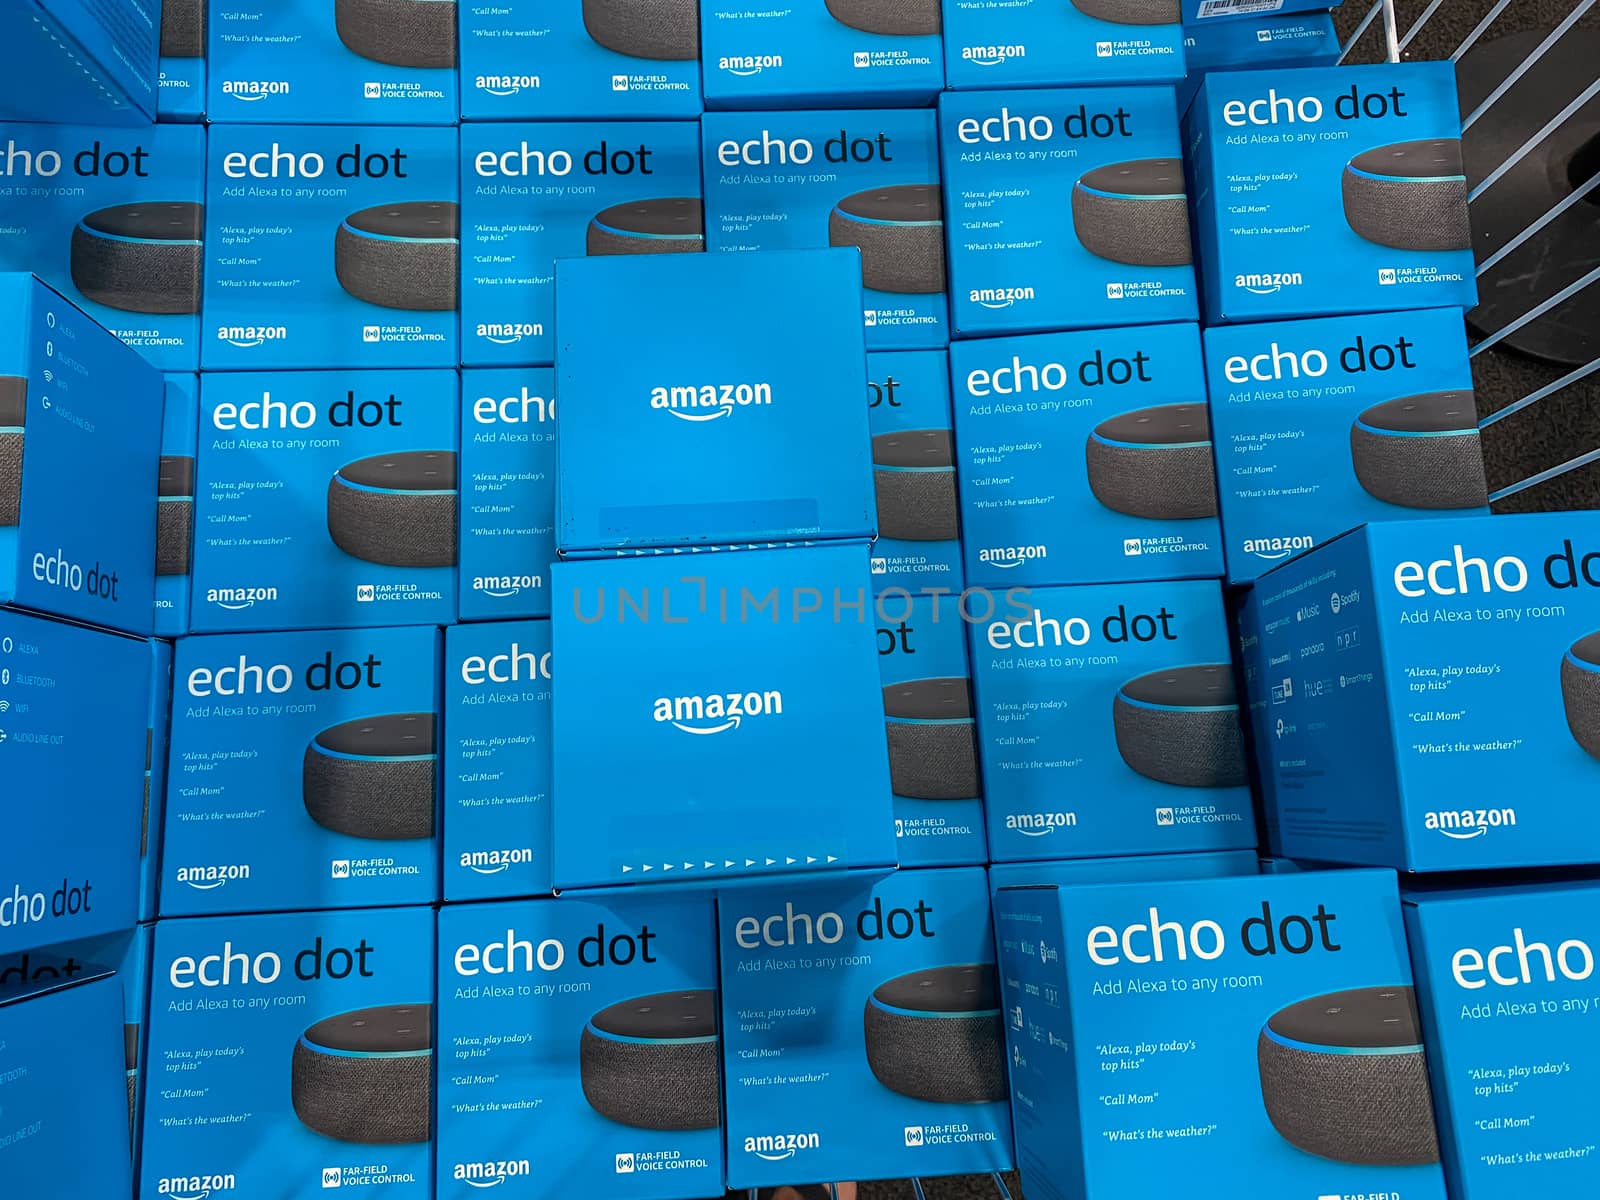 Orlando, FL/USA-10/14/20: Boxes of Amazon Echo Dot virtural assistants for sale in a display bin in a Best Buy chain electronics retail store.